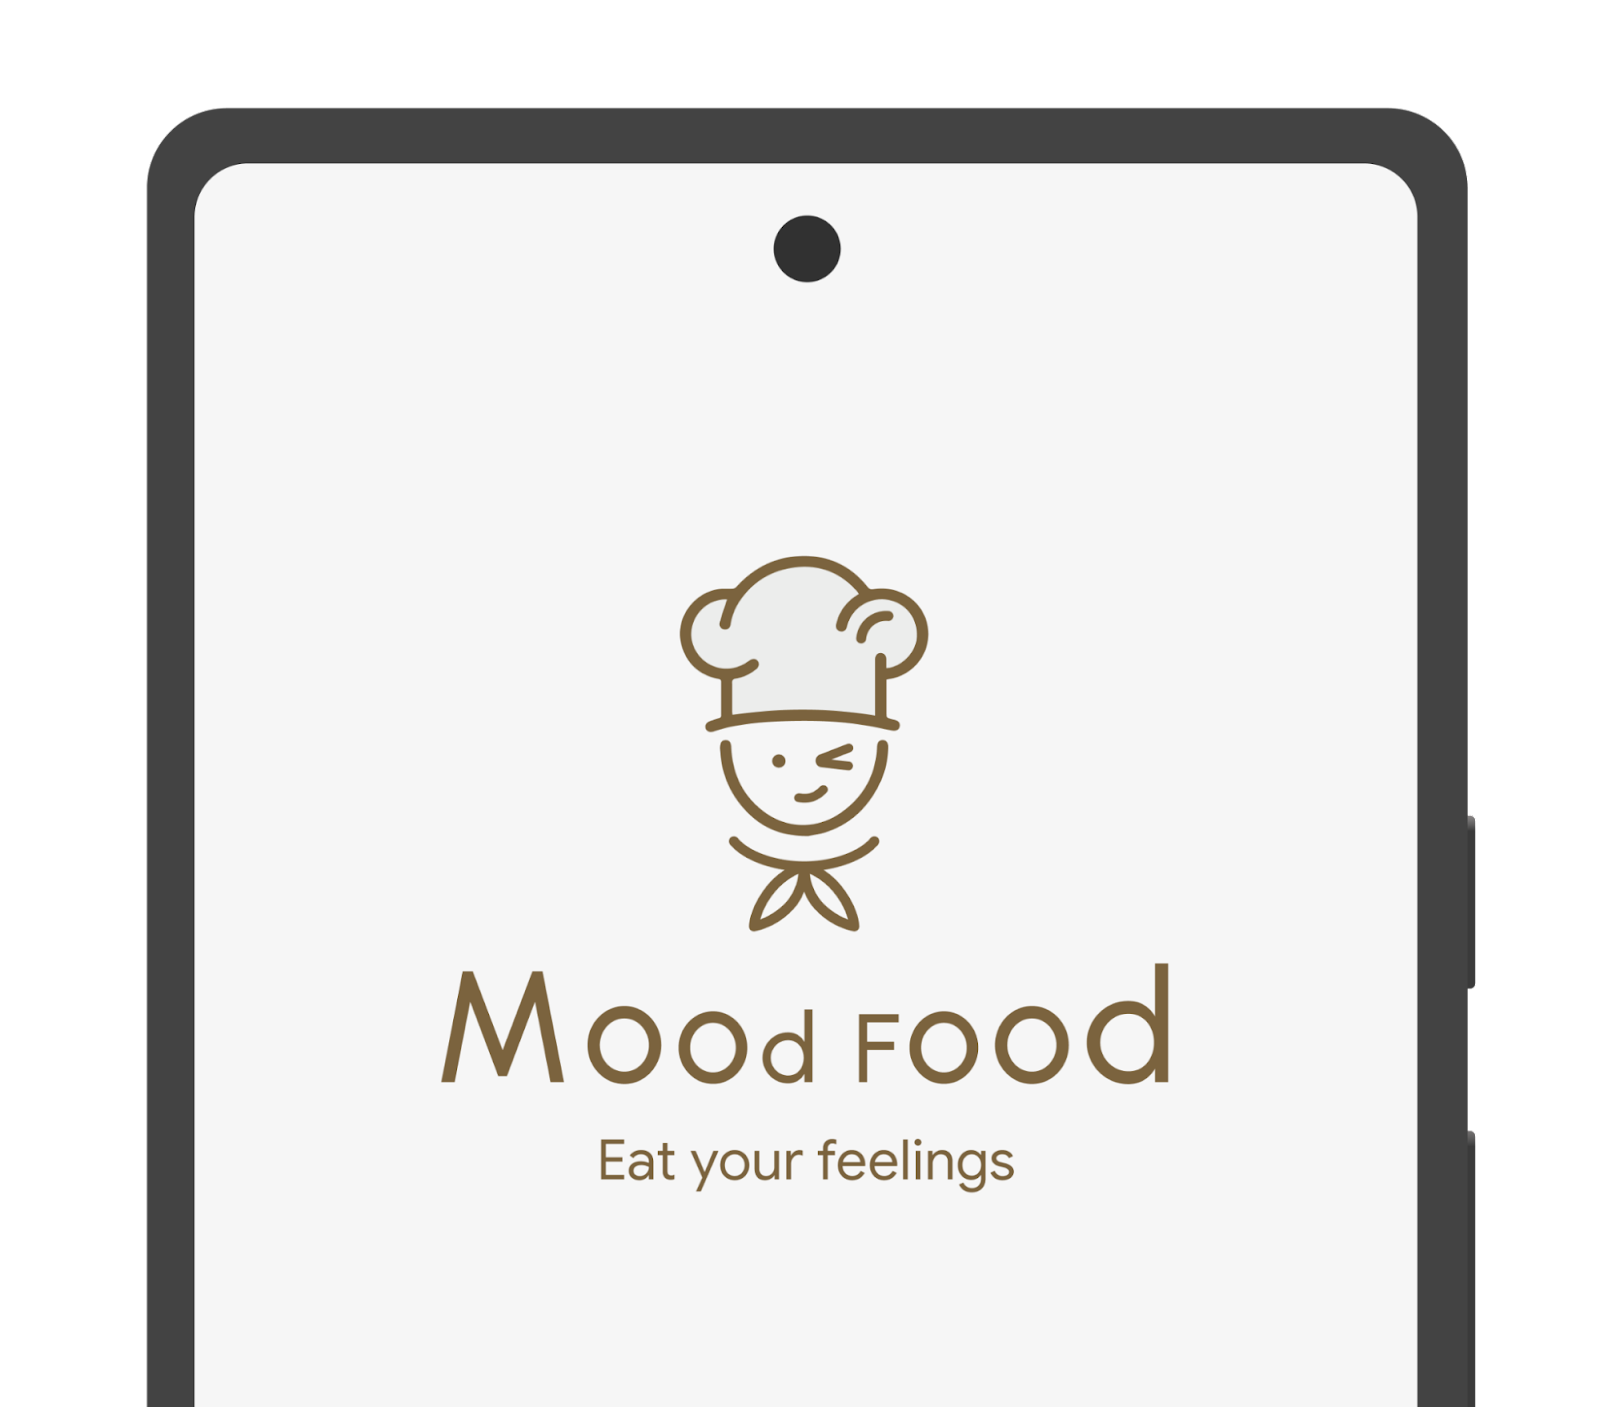 An image showing the Mood Food app splash screen which displays an illustration of a winking chef character and the title ‘Mood Food: Eat your feelings’